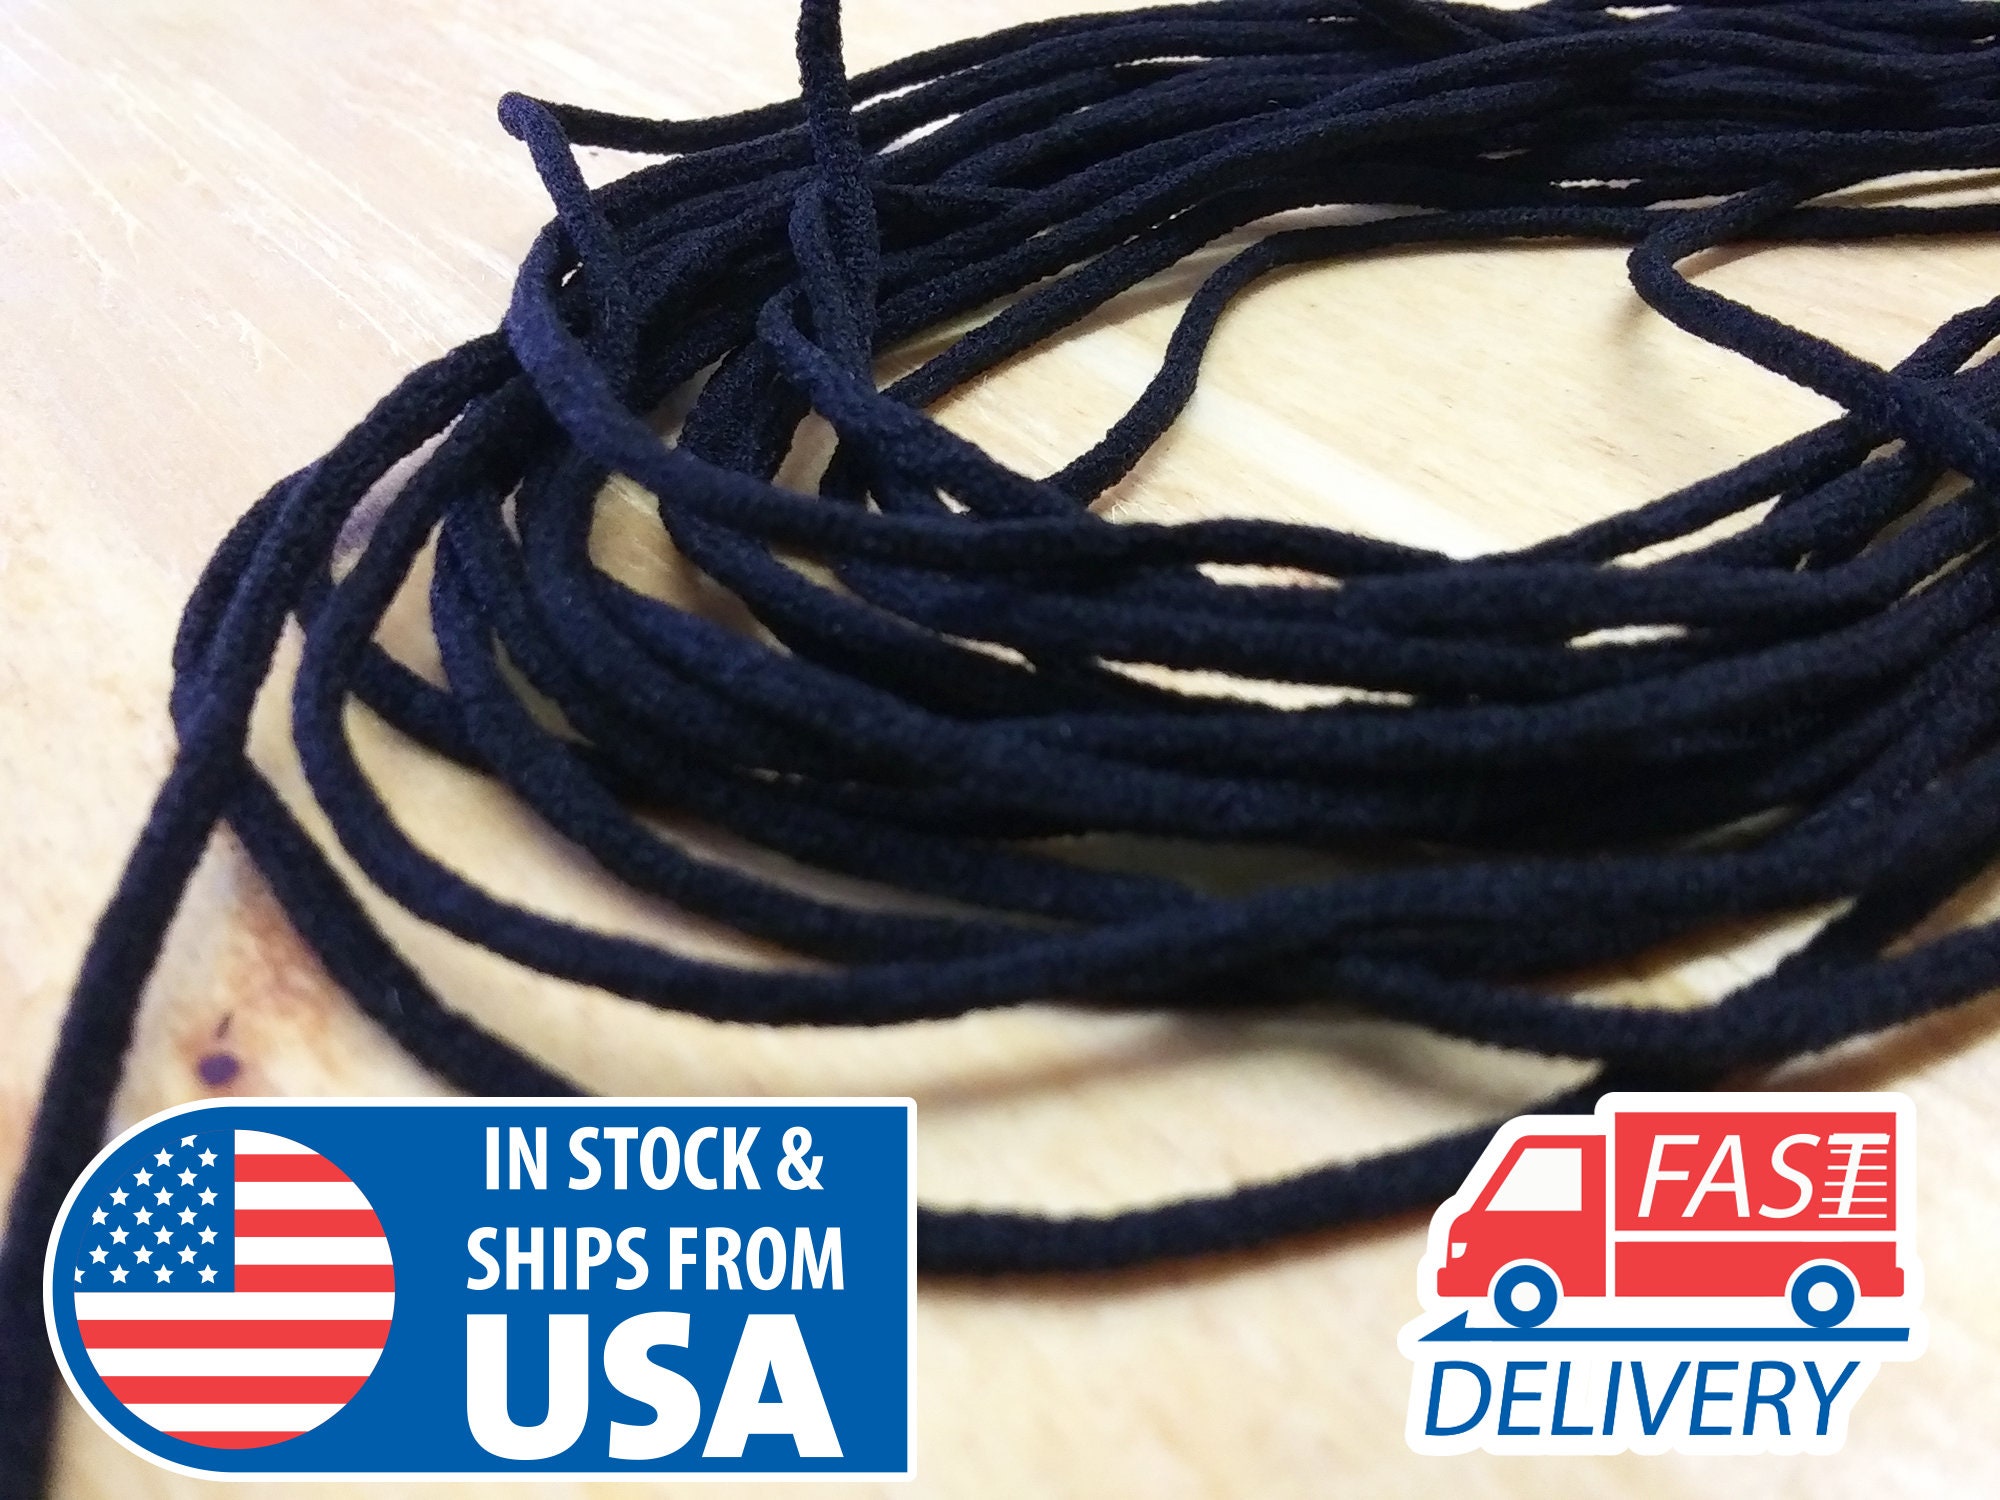 3 STRANDS 2MM/3MM Macrame Cord Cotton Twisted Rope String for Knitting DIY  Craft $12.31 - PicClick AU